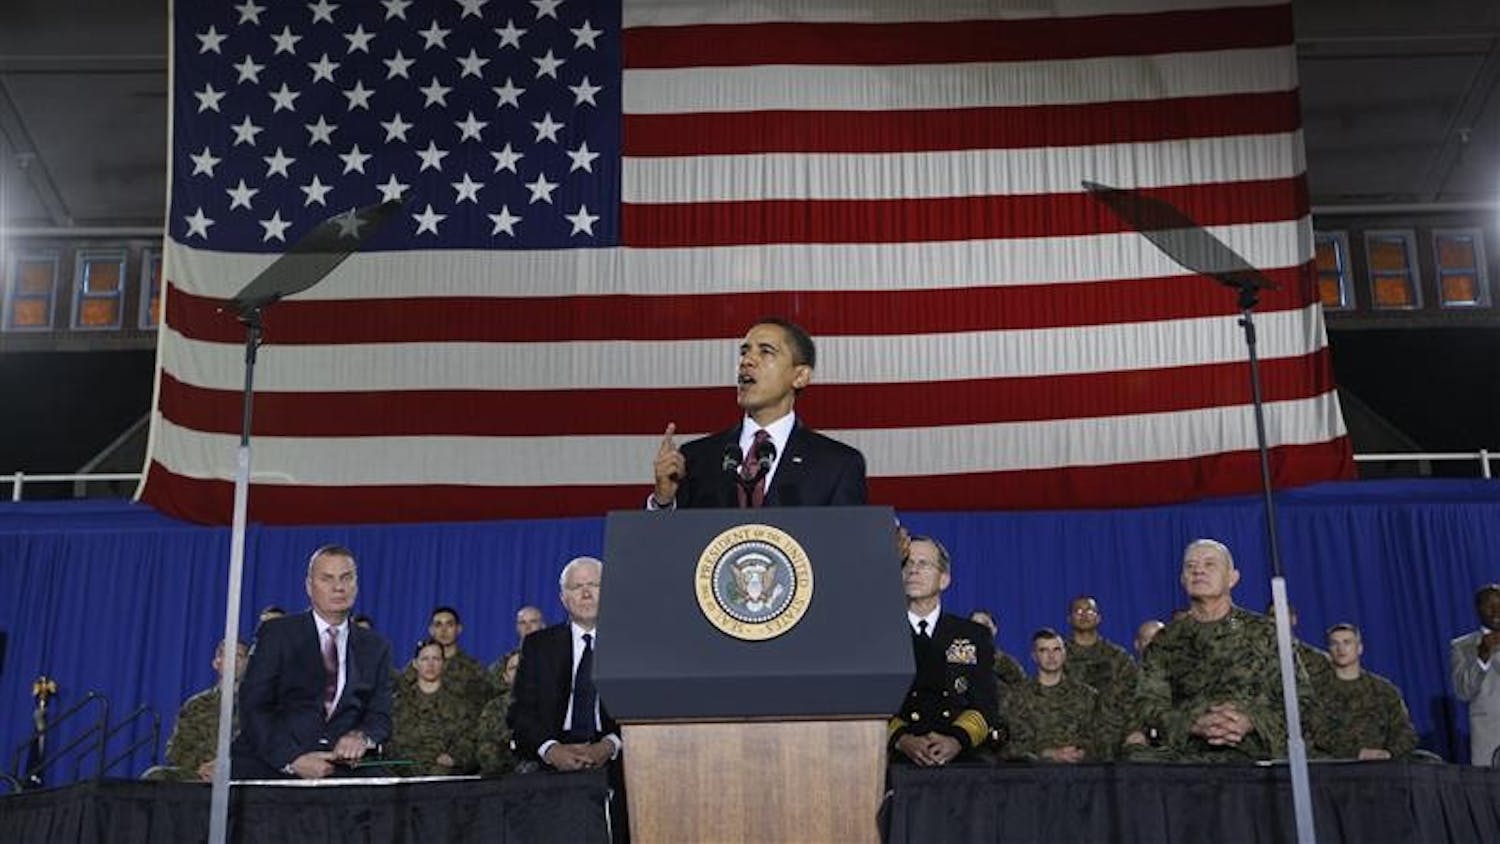 President Barack Obama speaks about combat troop levels in Iraq as he addresses military personnel Friday at Marine Corps Base Camp Lejeune, N.C. At rear are National Security Adviser James Jones, Defense Secretary Robert Gates, Chairman of the Joint Chiefs of Staff Adm. Mike Mullen, and Lt. Gen. Dennis Hejilik, Commanding General, Second Marine Expeditionary Force, Camp Lejeune.